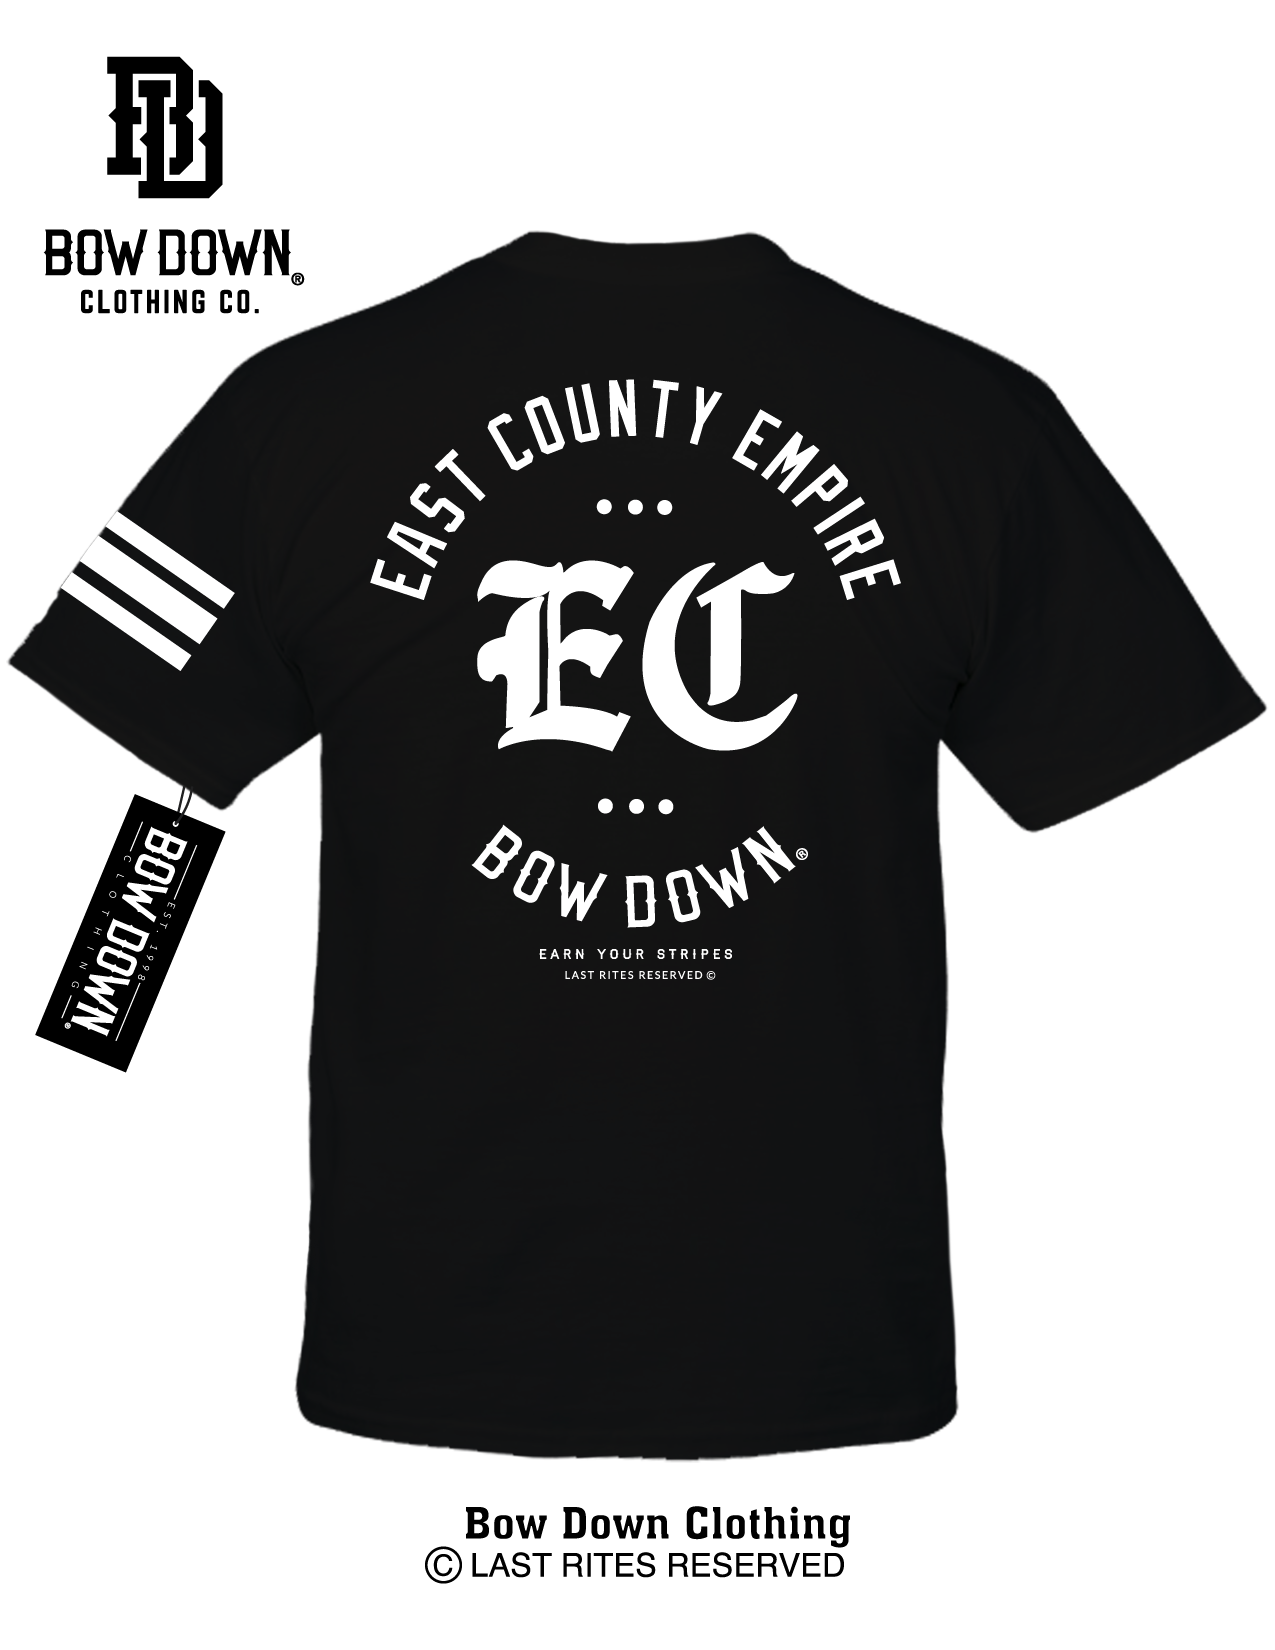 EAST COUNTY EMPIRE